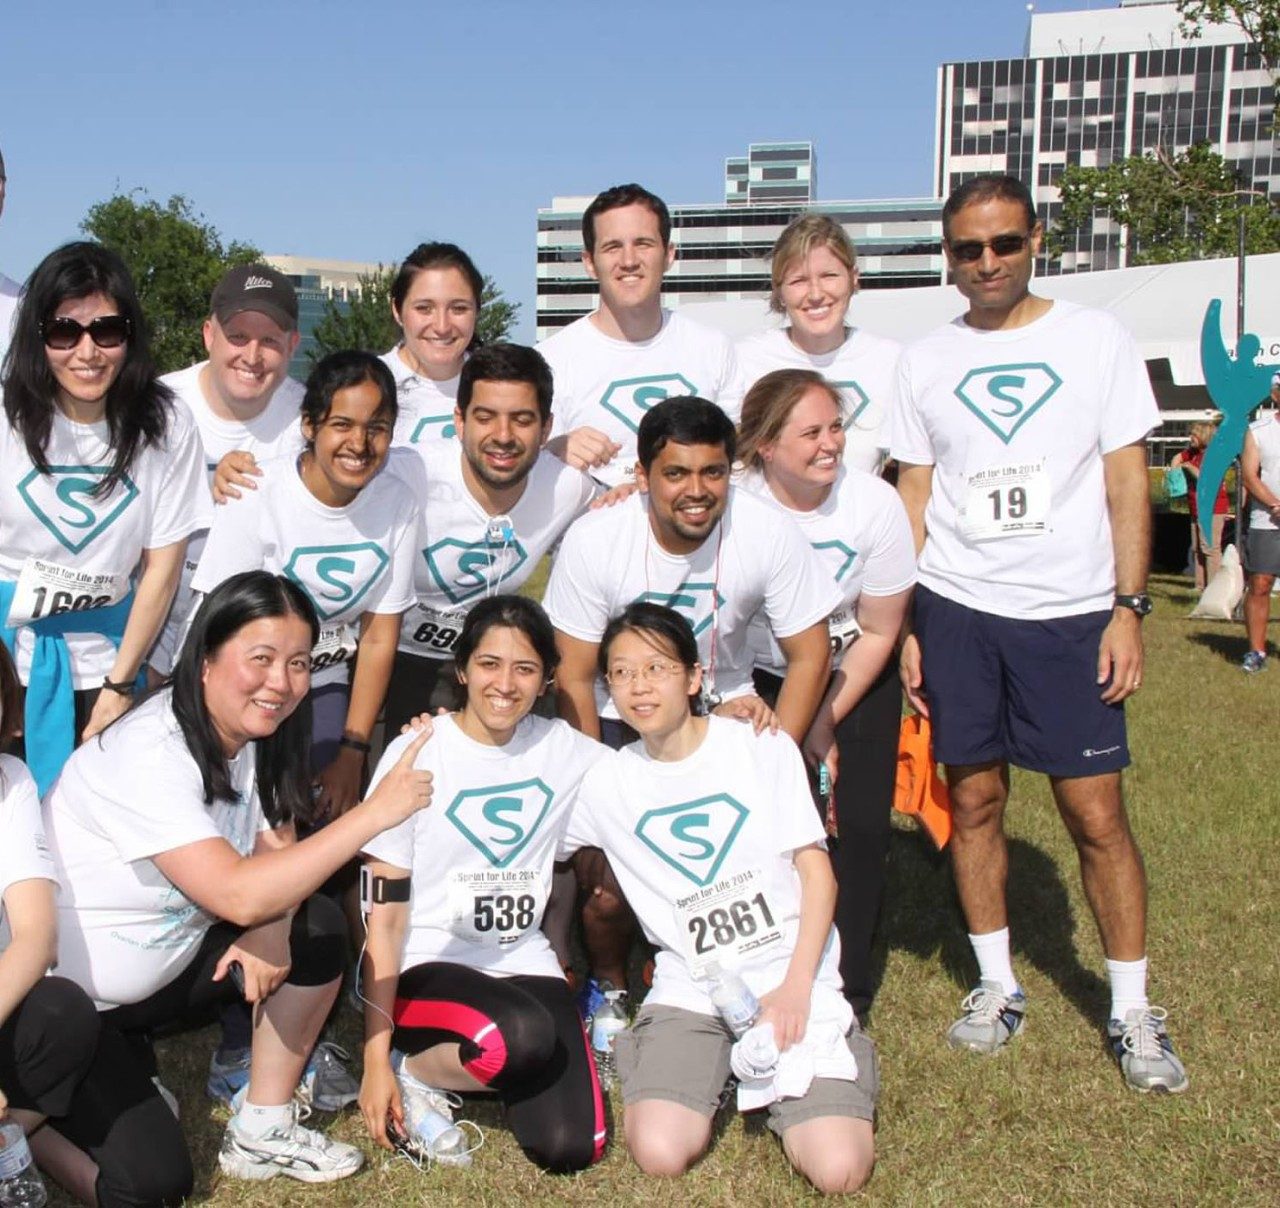 Anil Sood, M.D., with members of his lab and the Blanton-Davis Ovarian Cancer Research Program, at MD Anderson's Sprint for Life fundraiser.